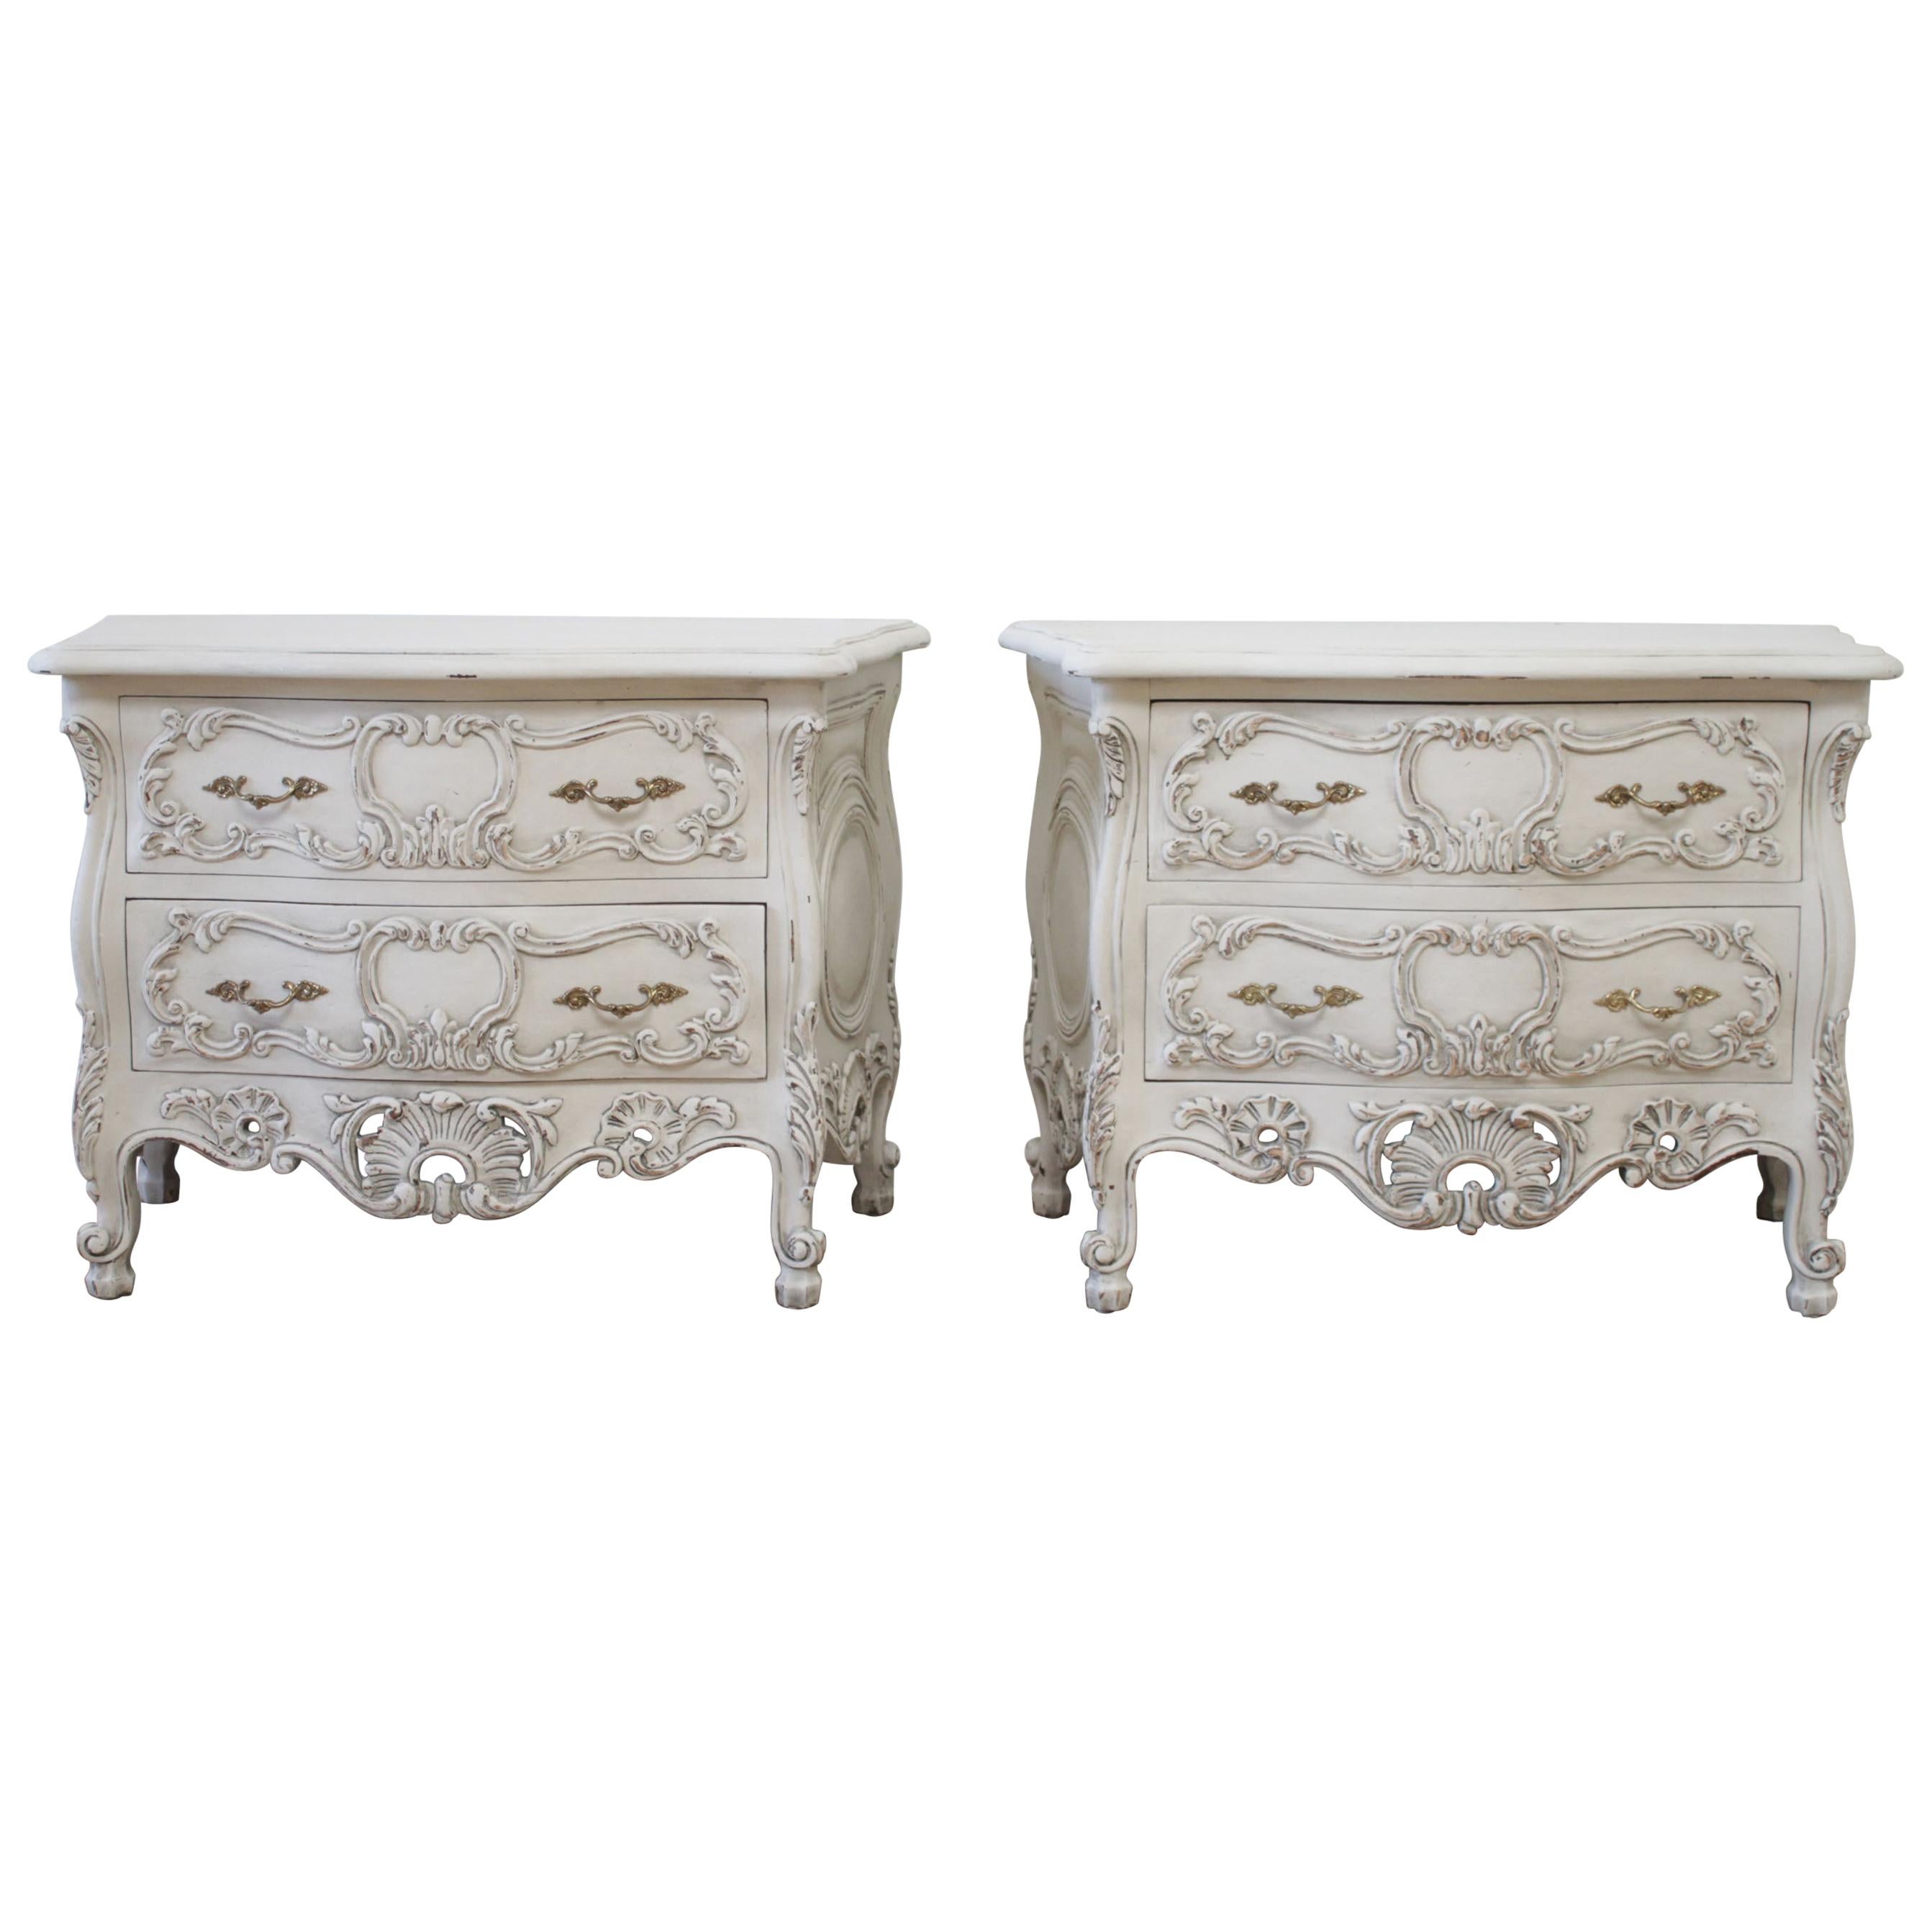 Vintage Pair of Carved and Painted Nightstands or Bedside Commodes